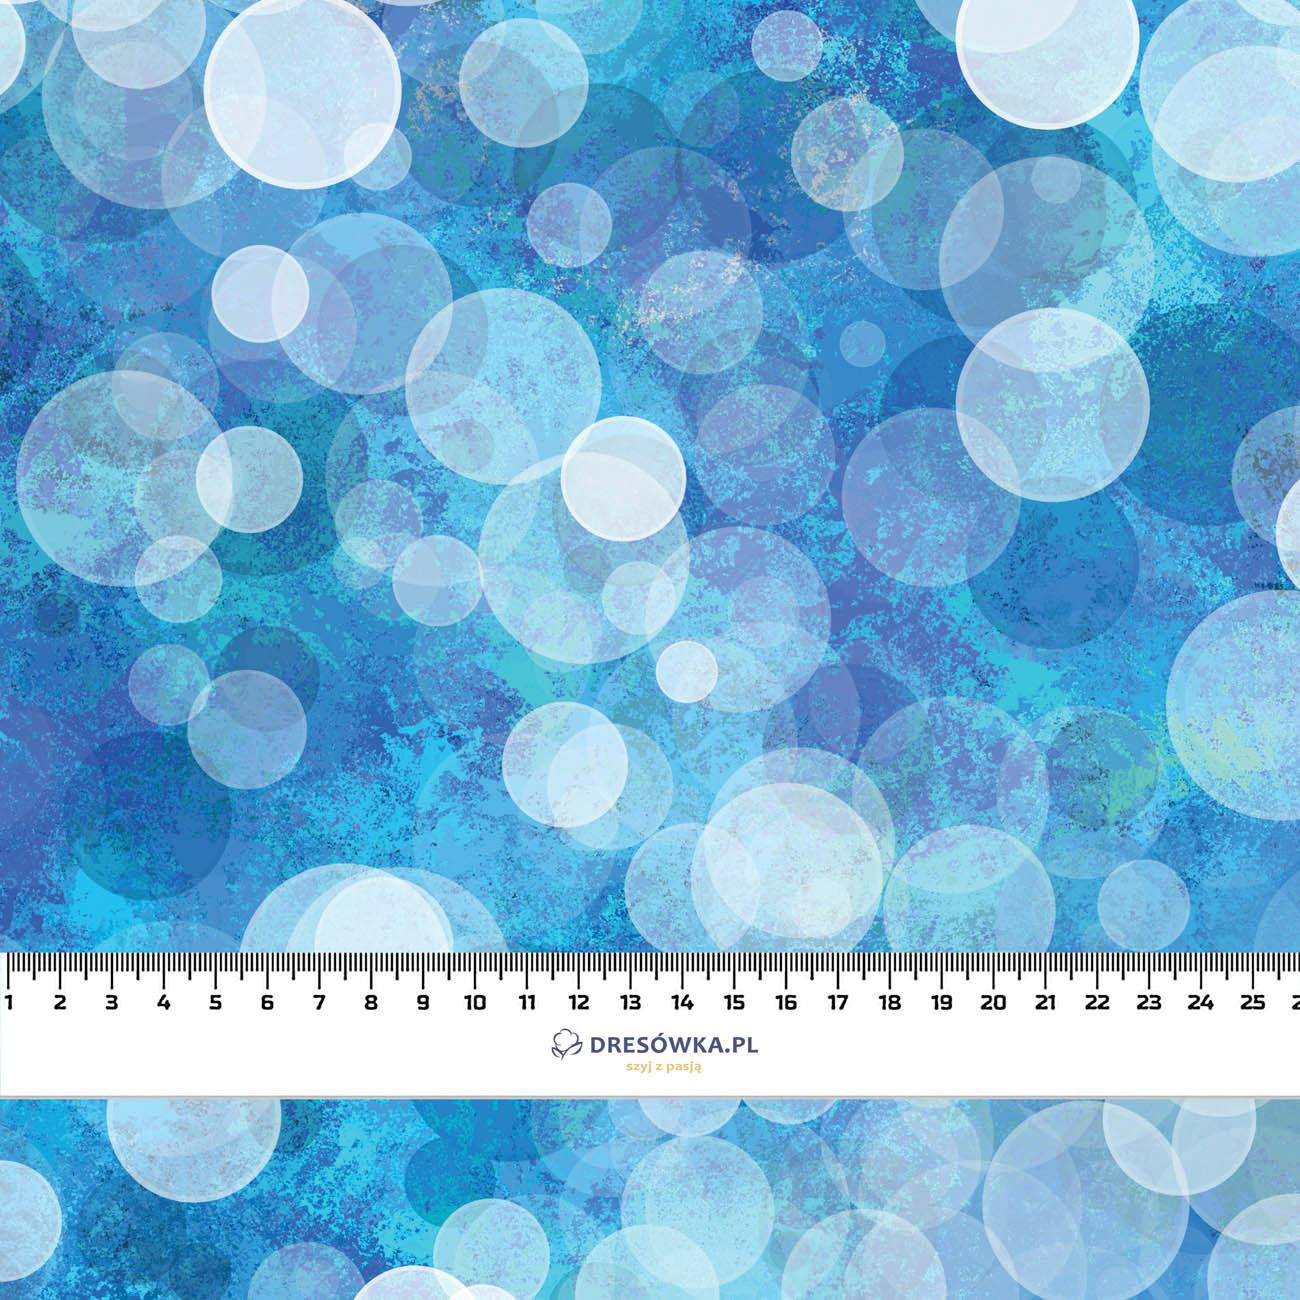 WINTER BOKEH (WINTER IS COMING) - Cotton woven fabric